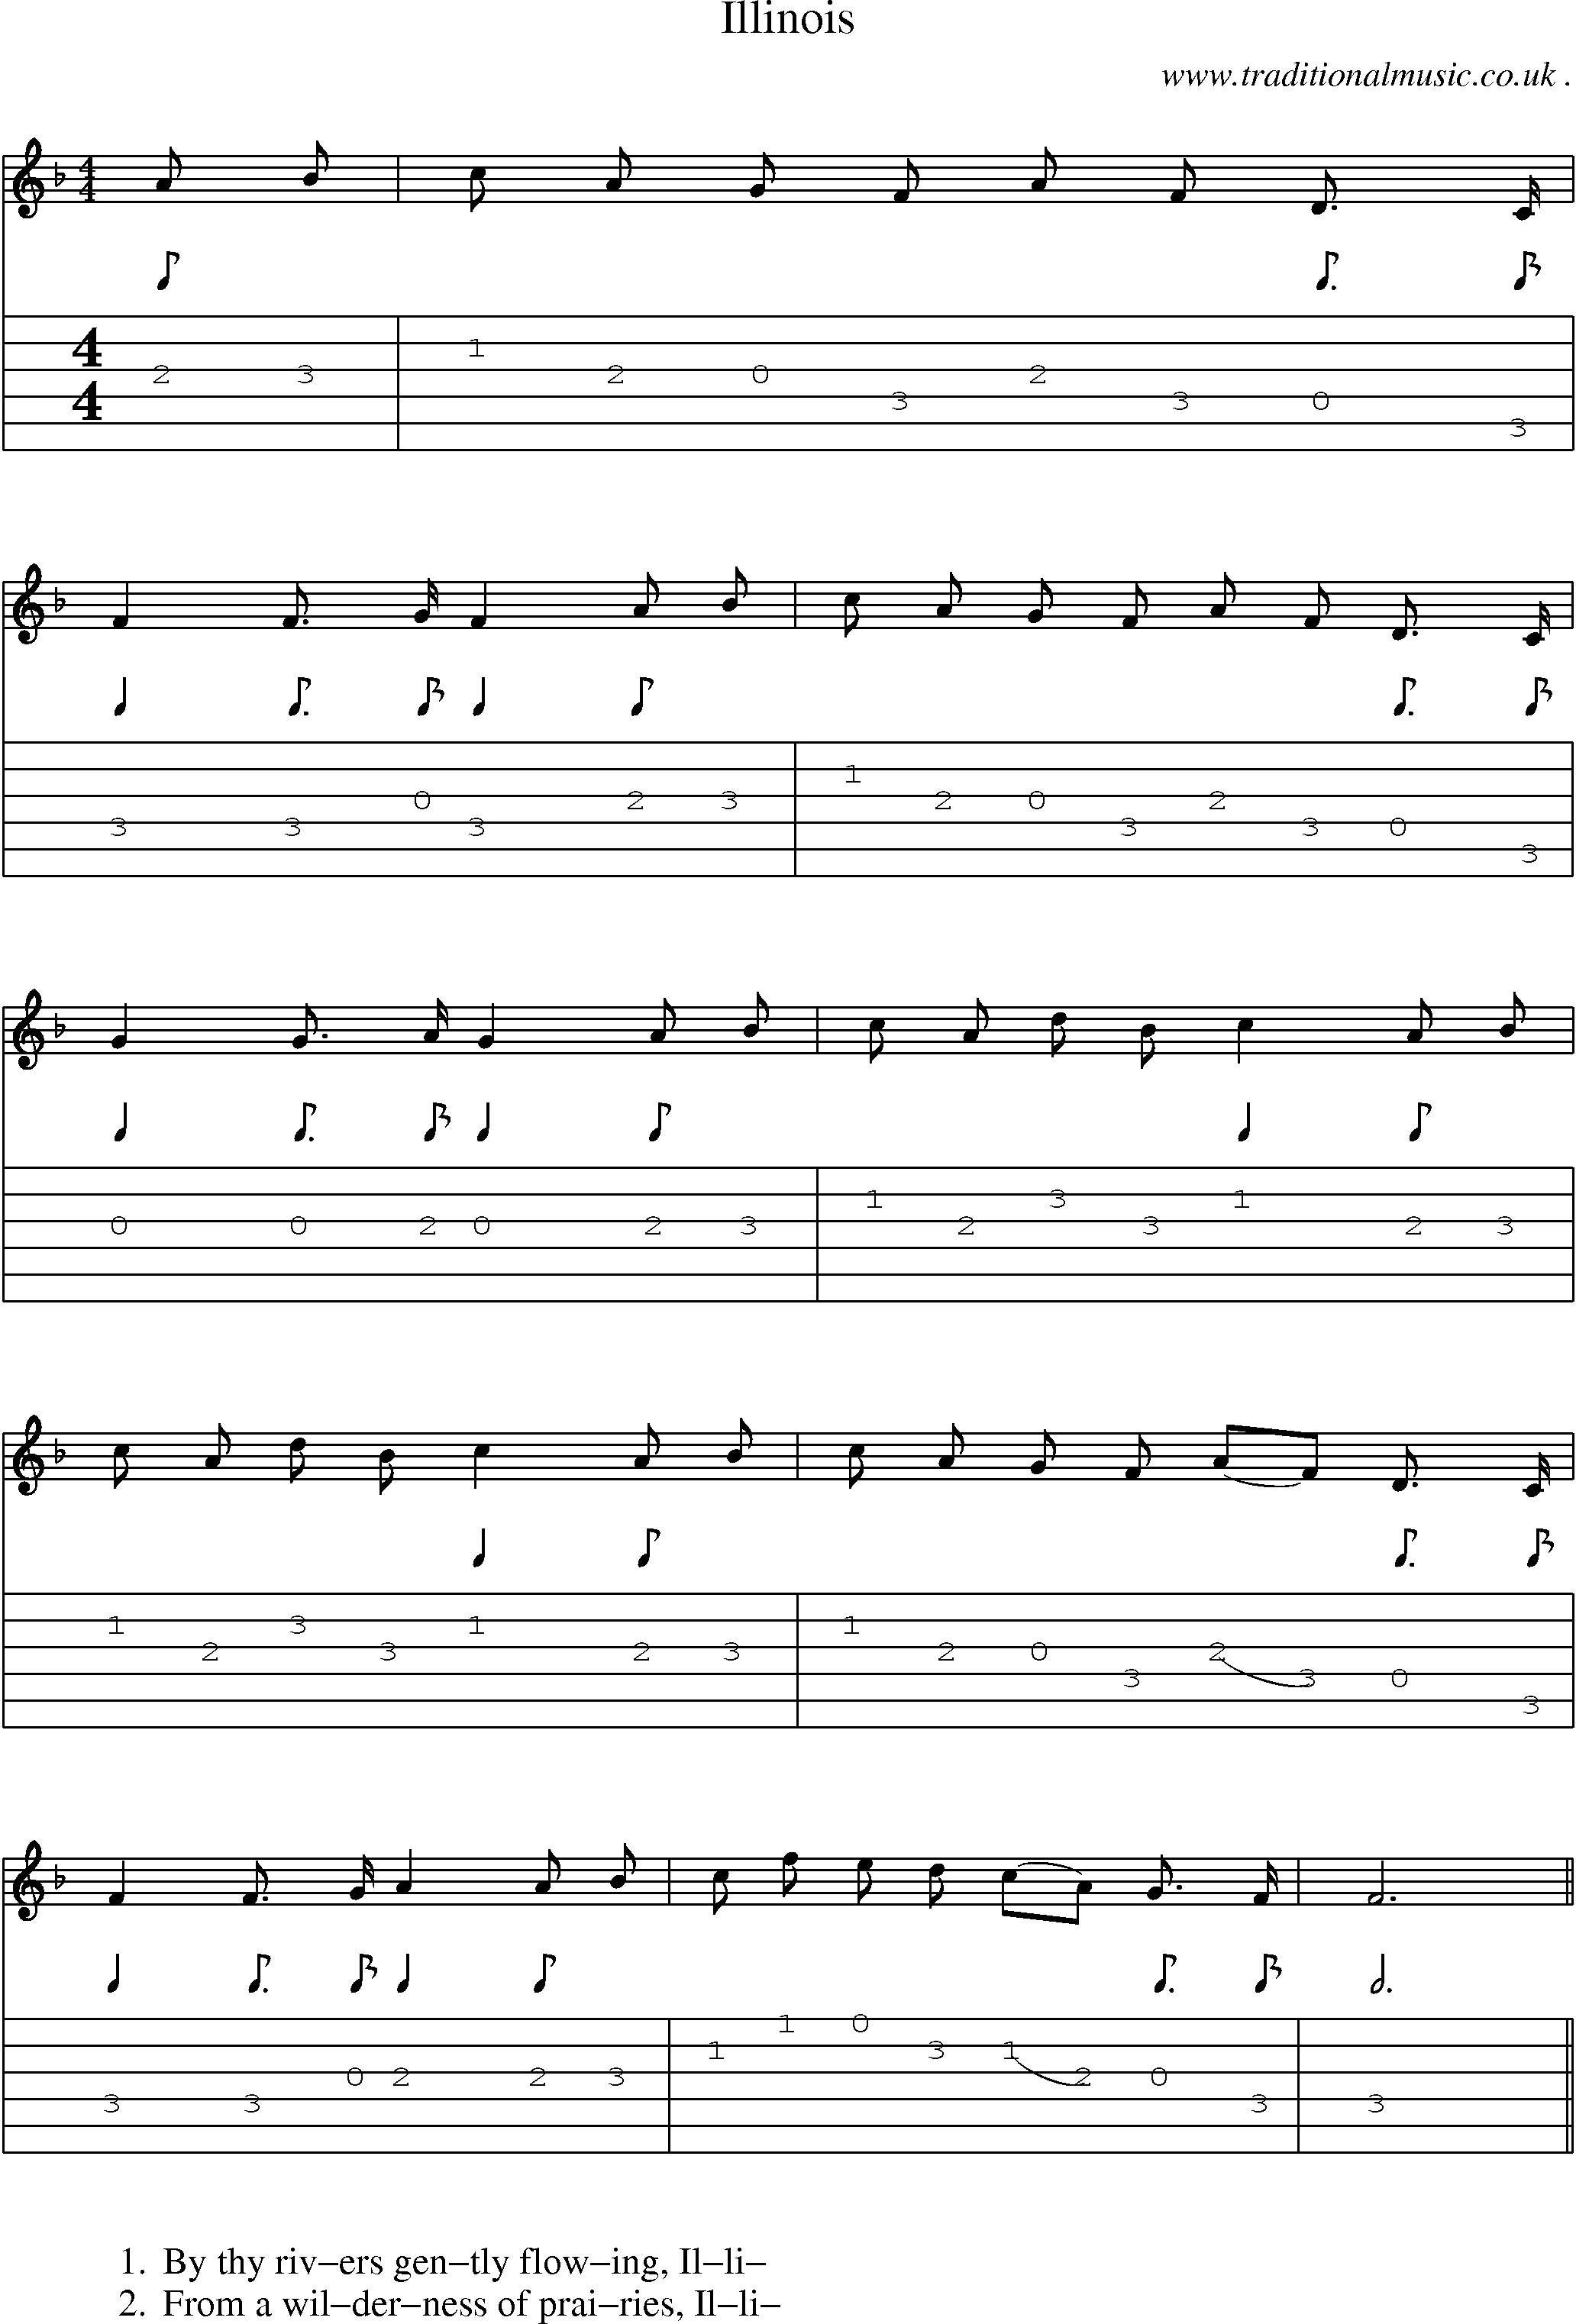 Music Score and Guitar Tabs for Illinois